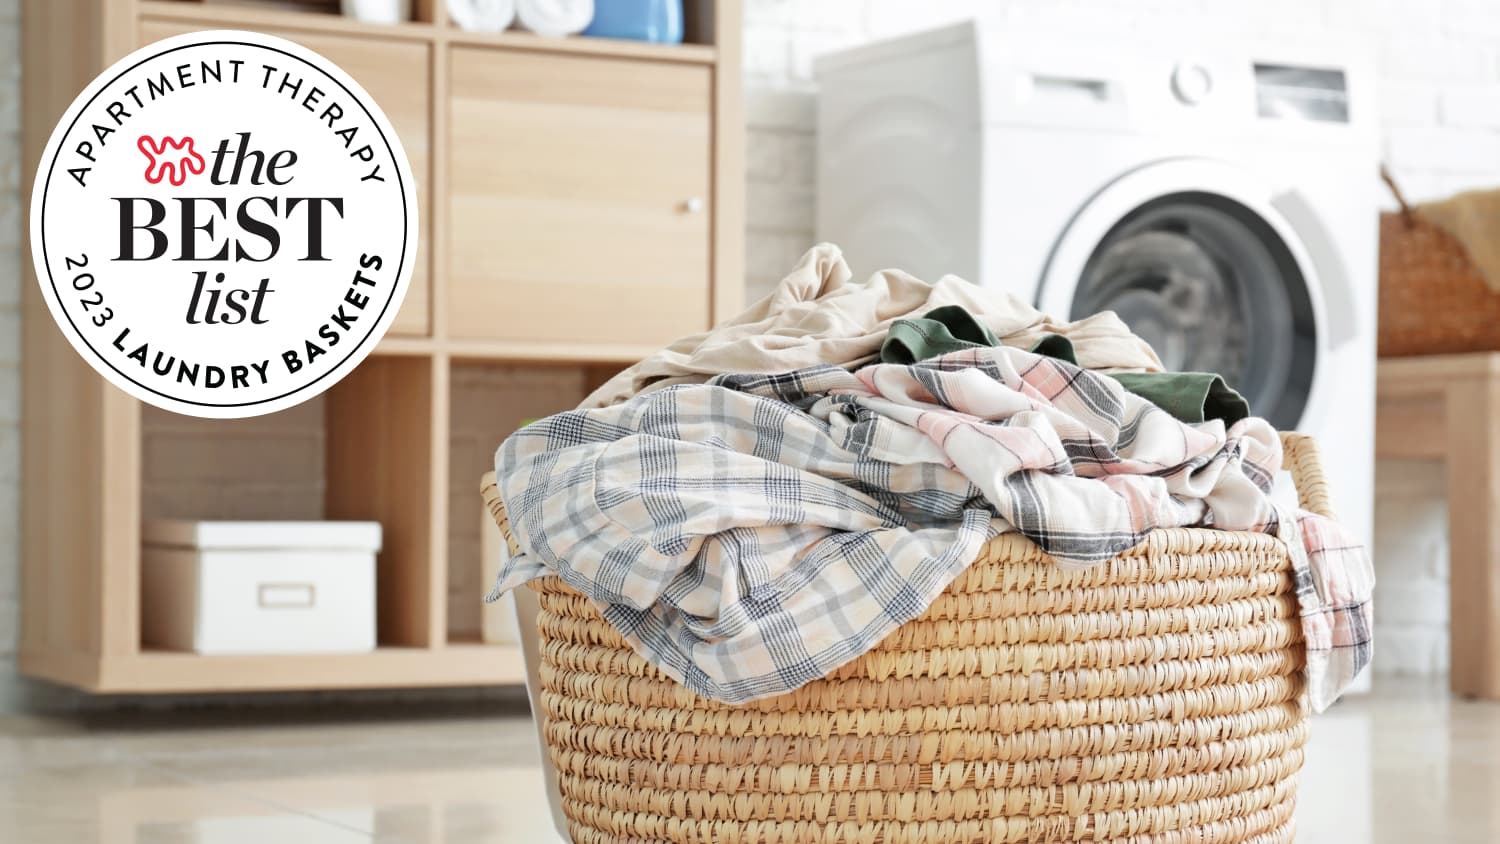 10 Laundry Basket Storage Ideas to Conceal Any Clutter